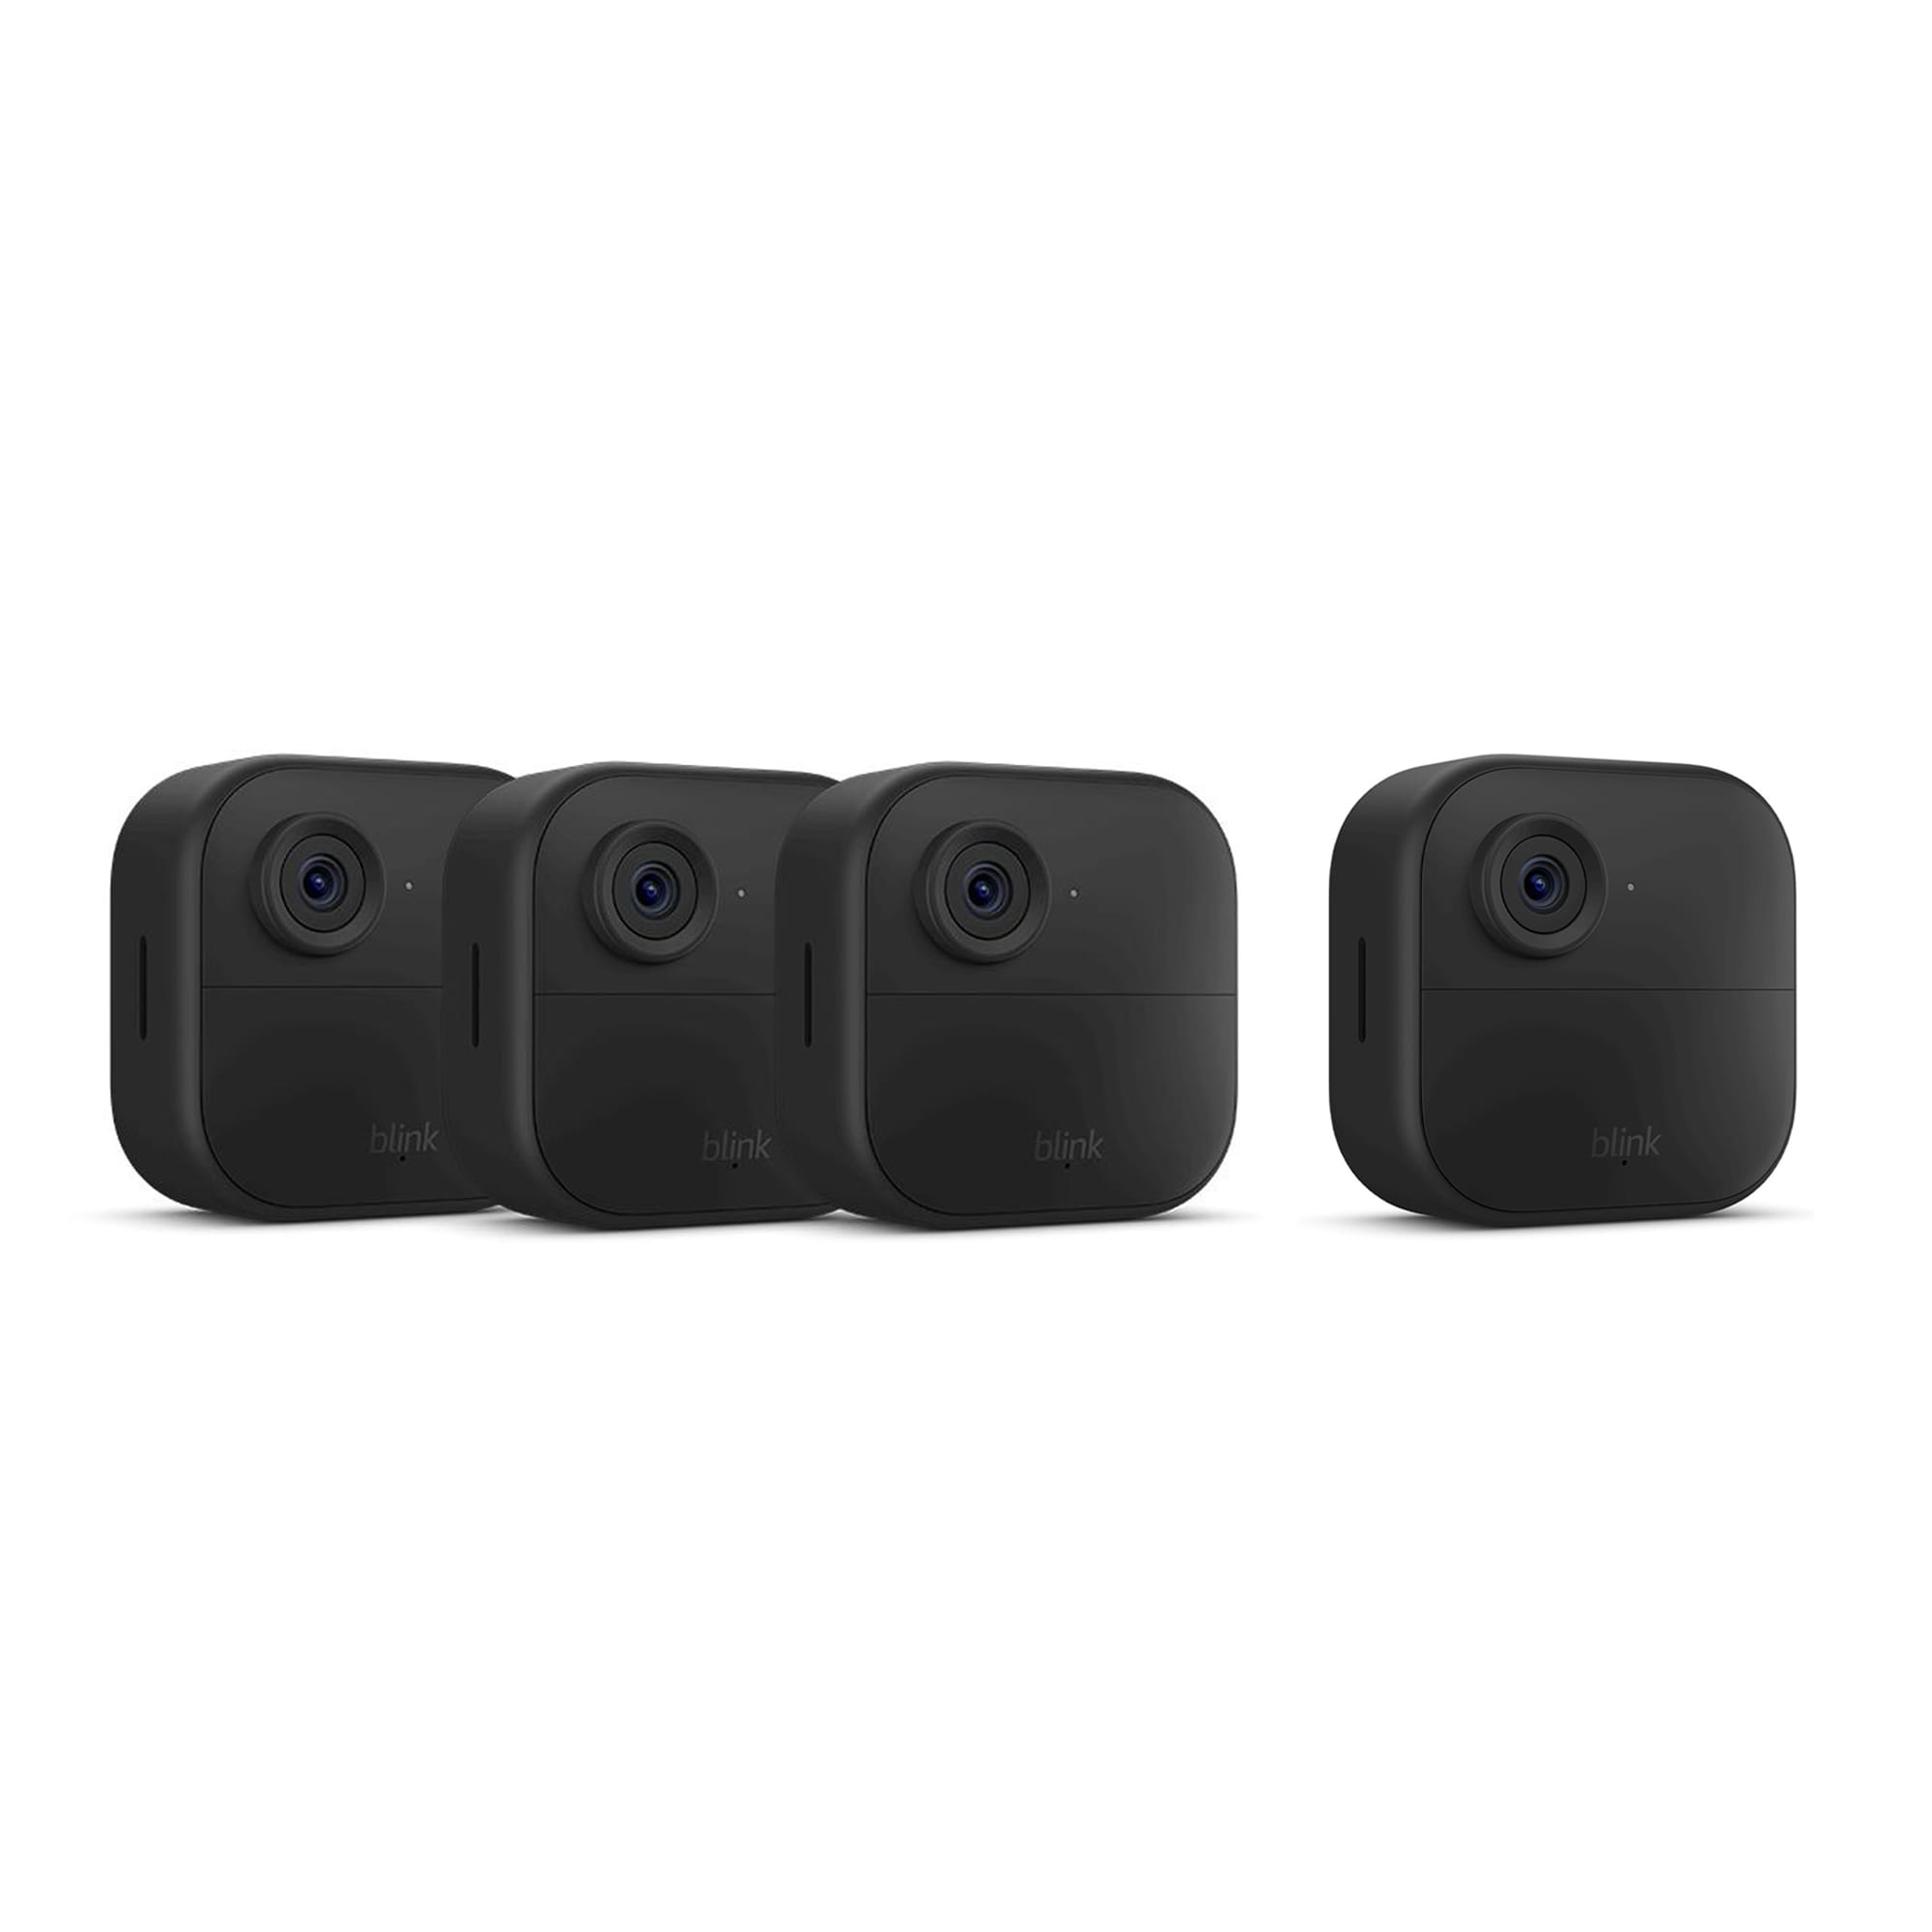 Mini camera physical features — Blink Support